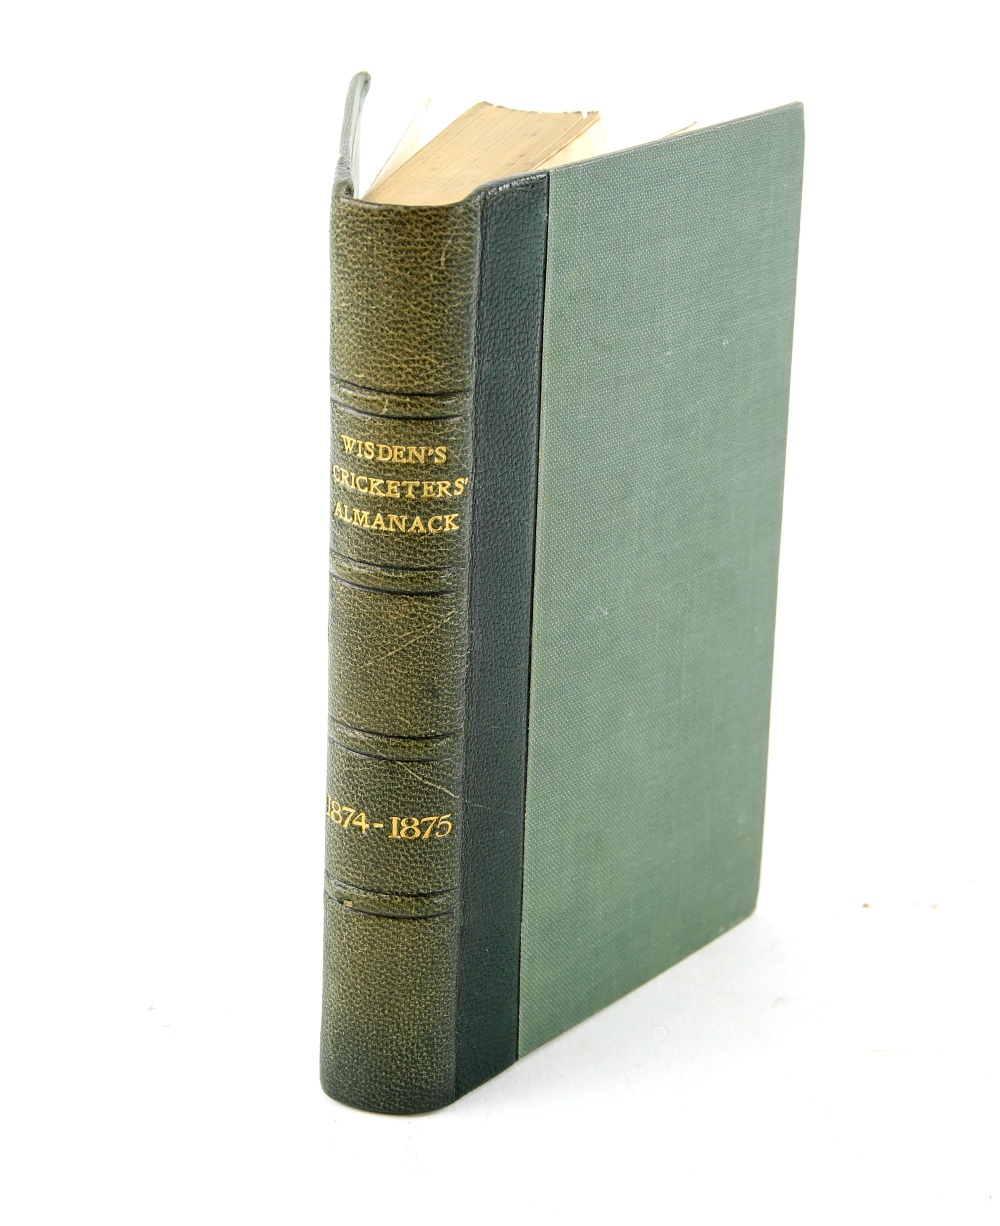 John Wisden's Cricketers' Almanack 1874-1875, 1874 180 pages, 1875, 212 pages, bound as a single